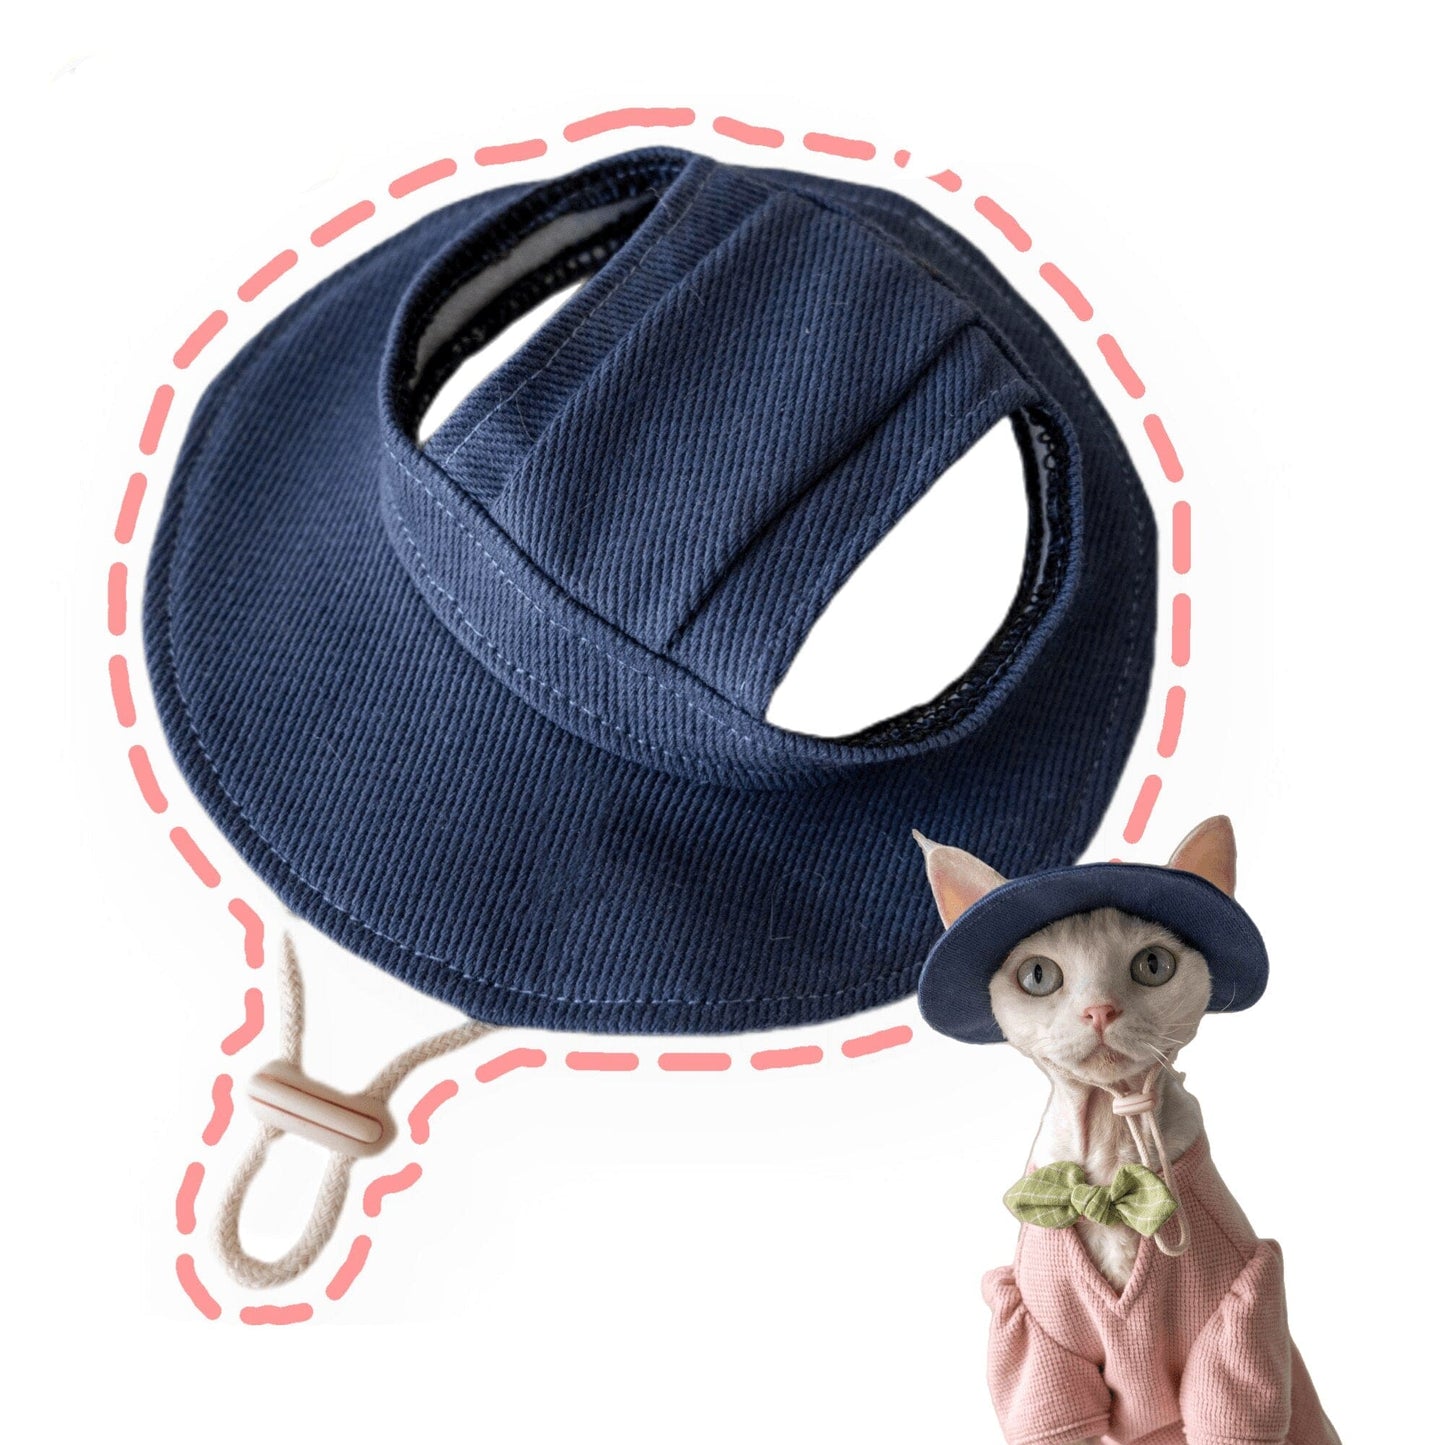 Sunscreen cat hat with adjustable strap for journeys